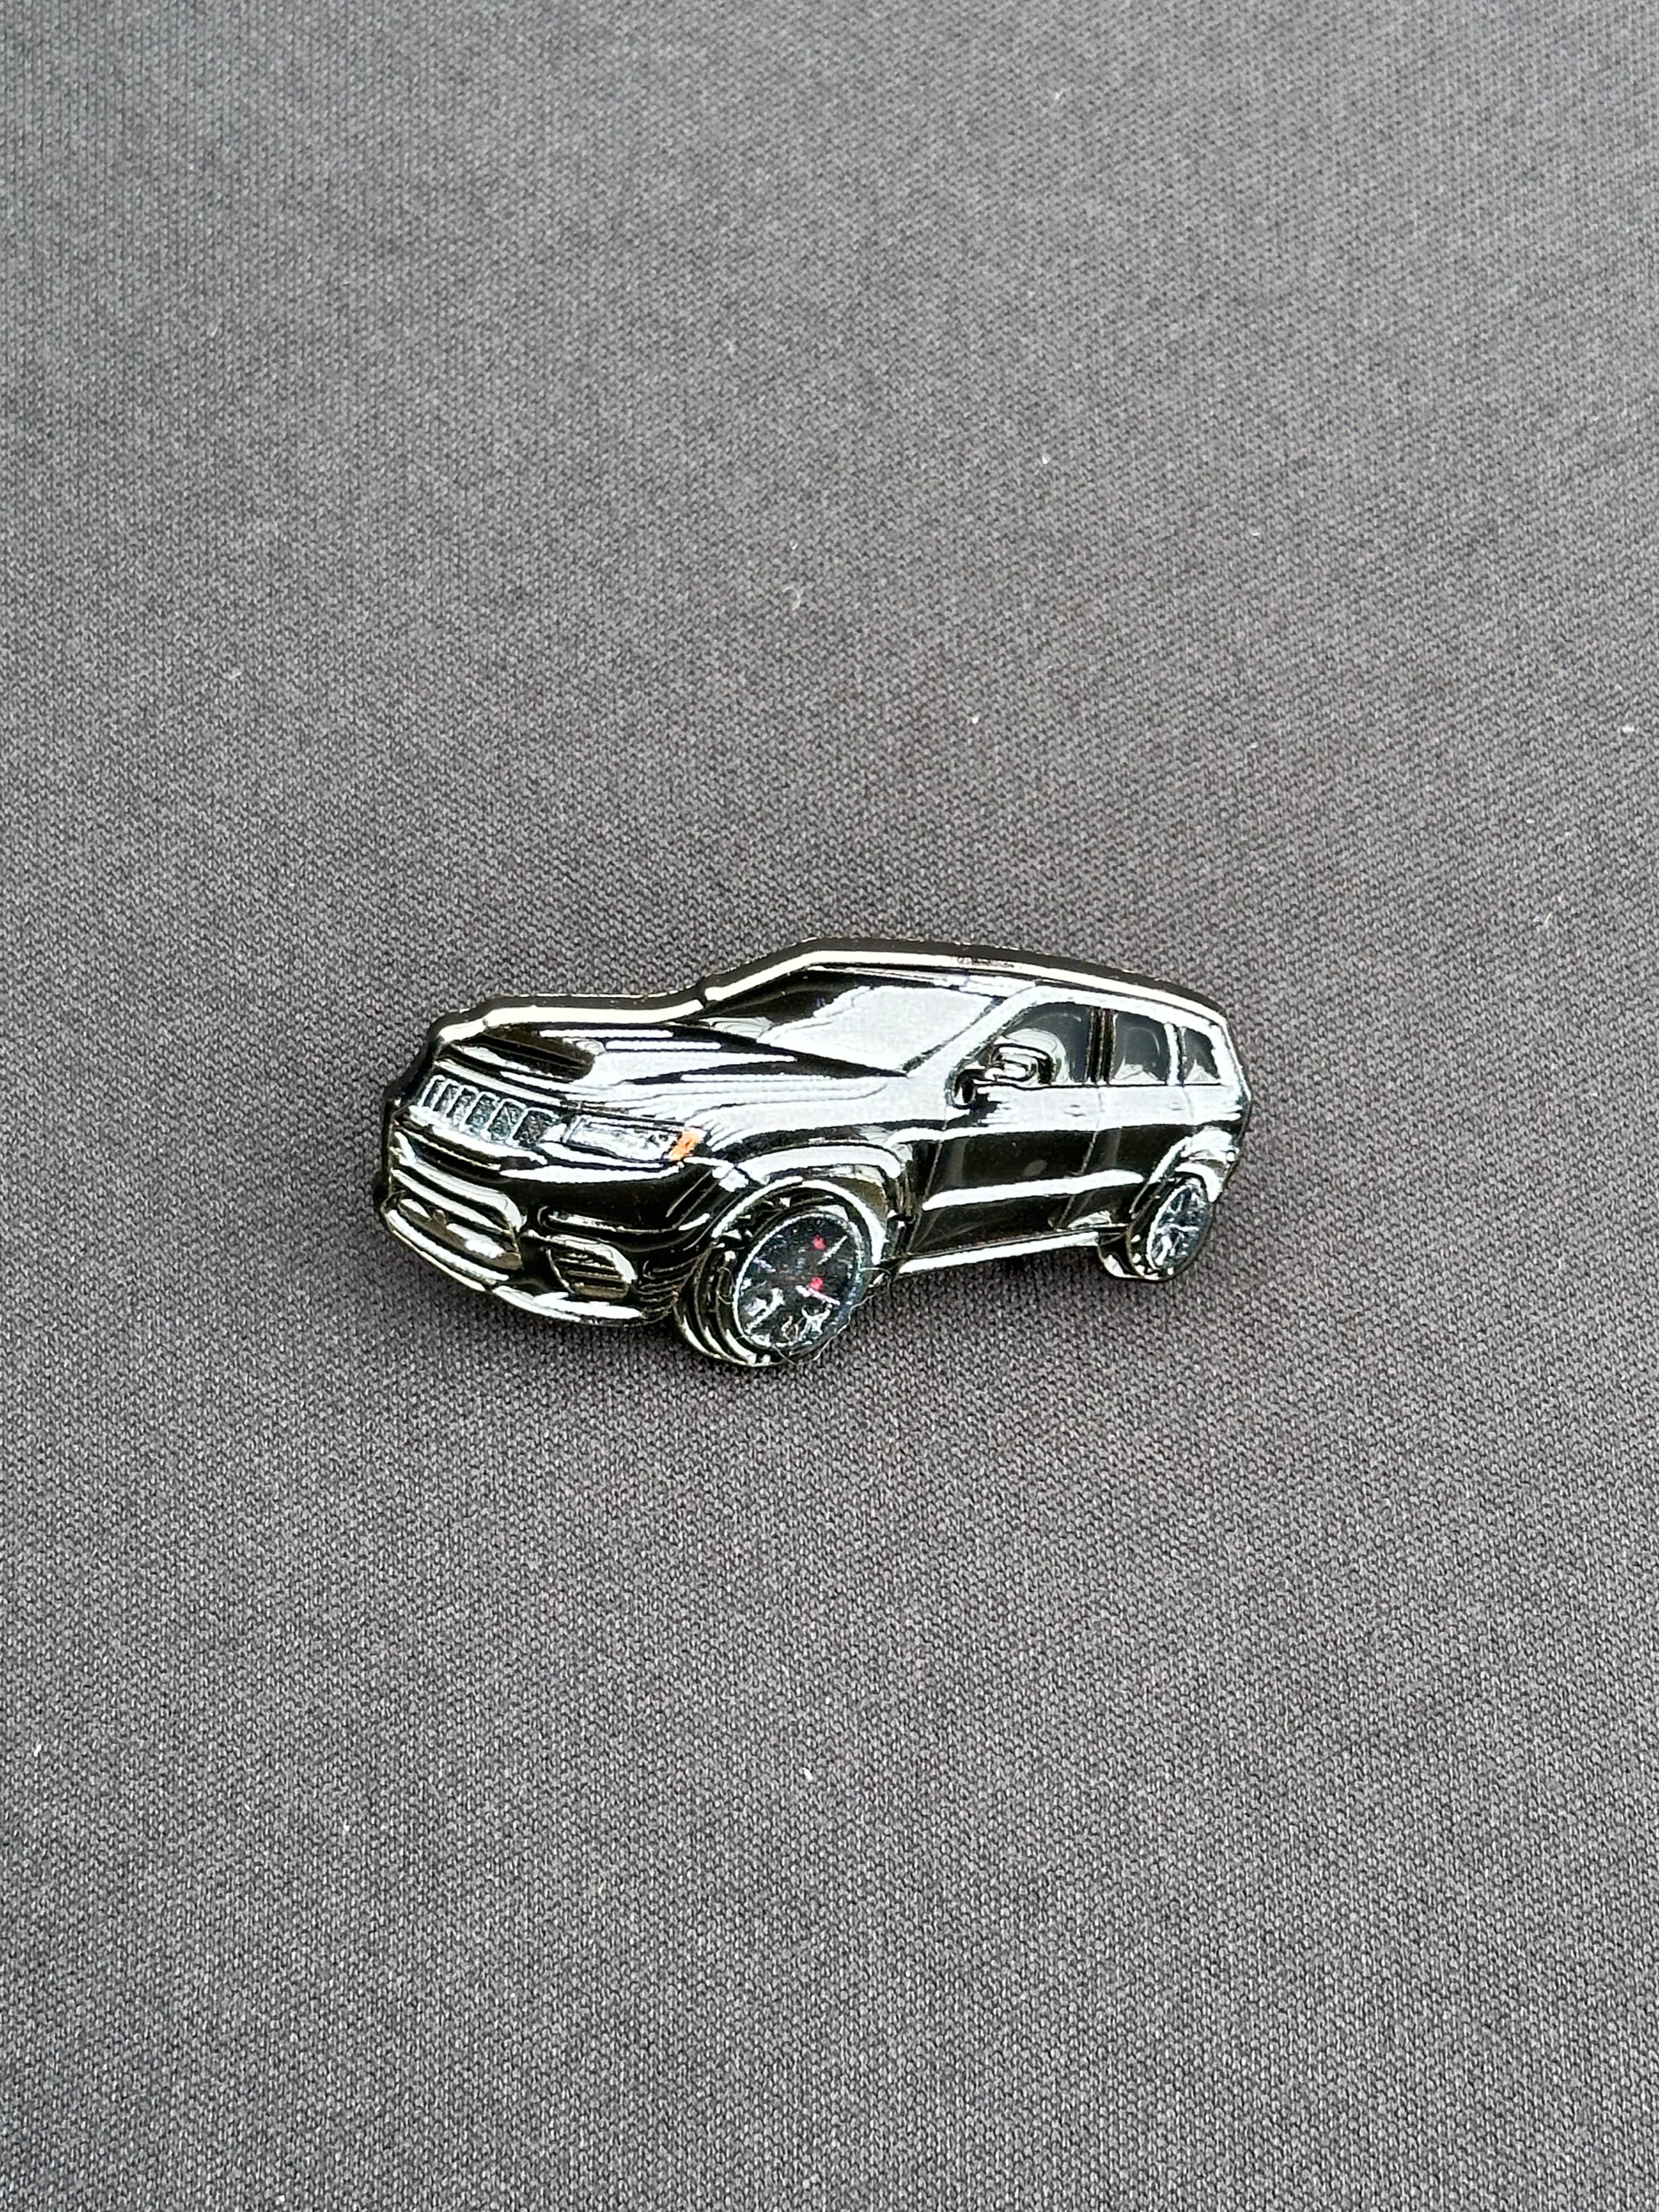 *NEW BLACK "TRACKHAWK" EXCLUSIVE PIN VERY LIMITED